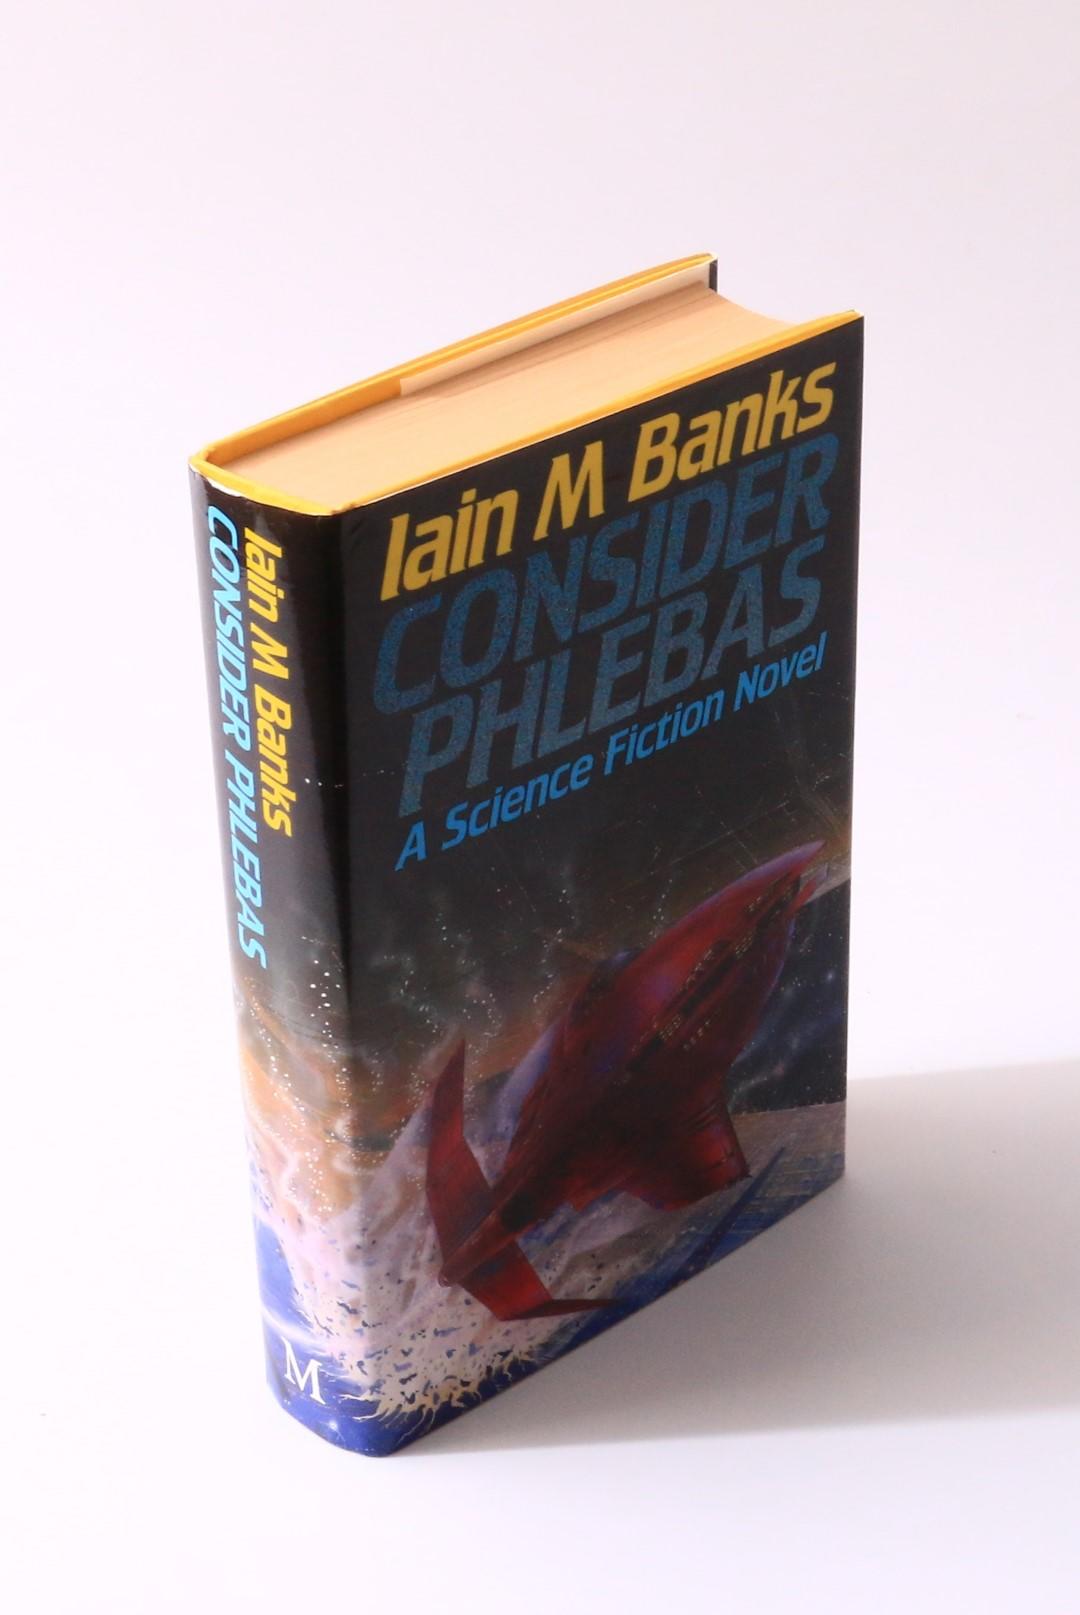 Iain M. Banks - Consider Phlebas - Macmillan & Co., 1987, Signed First Edition.